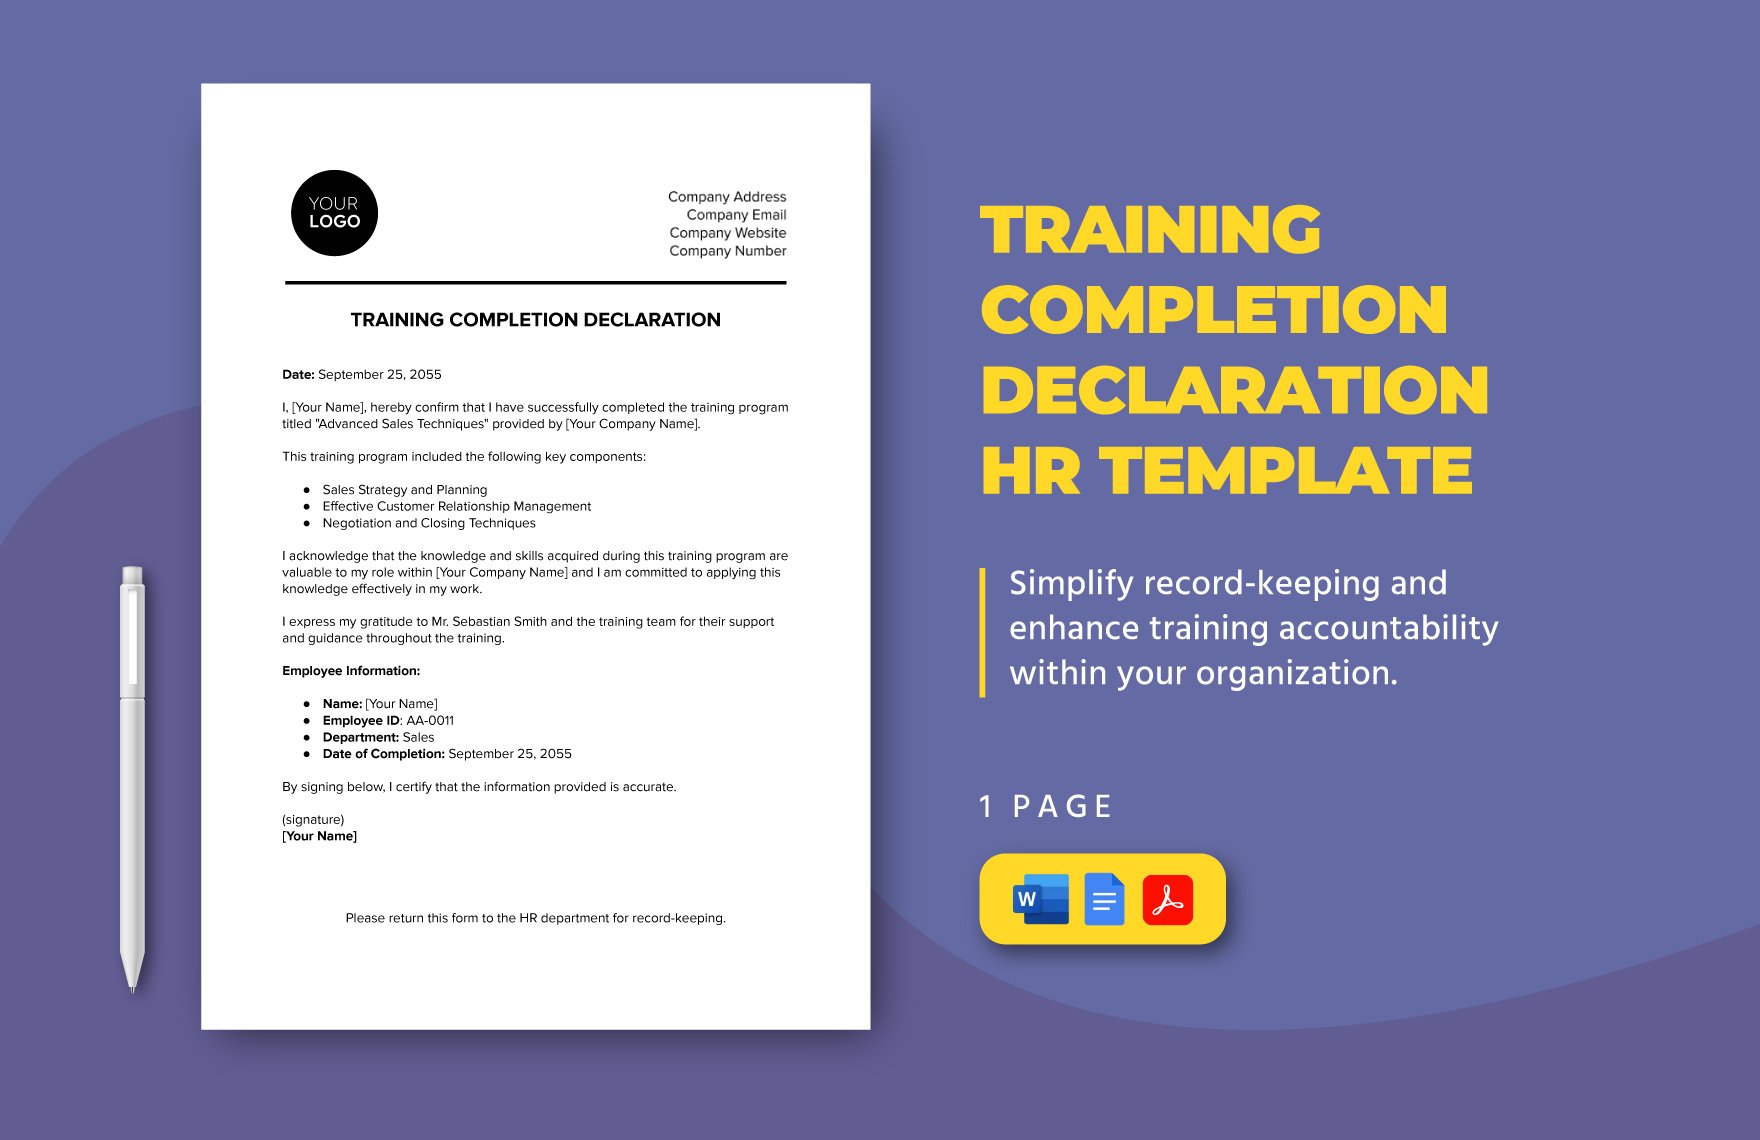 Training Completion Declaration HR Template in Word, Google Docs, PDF